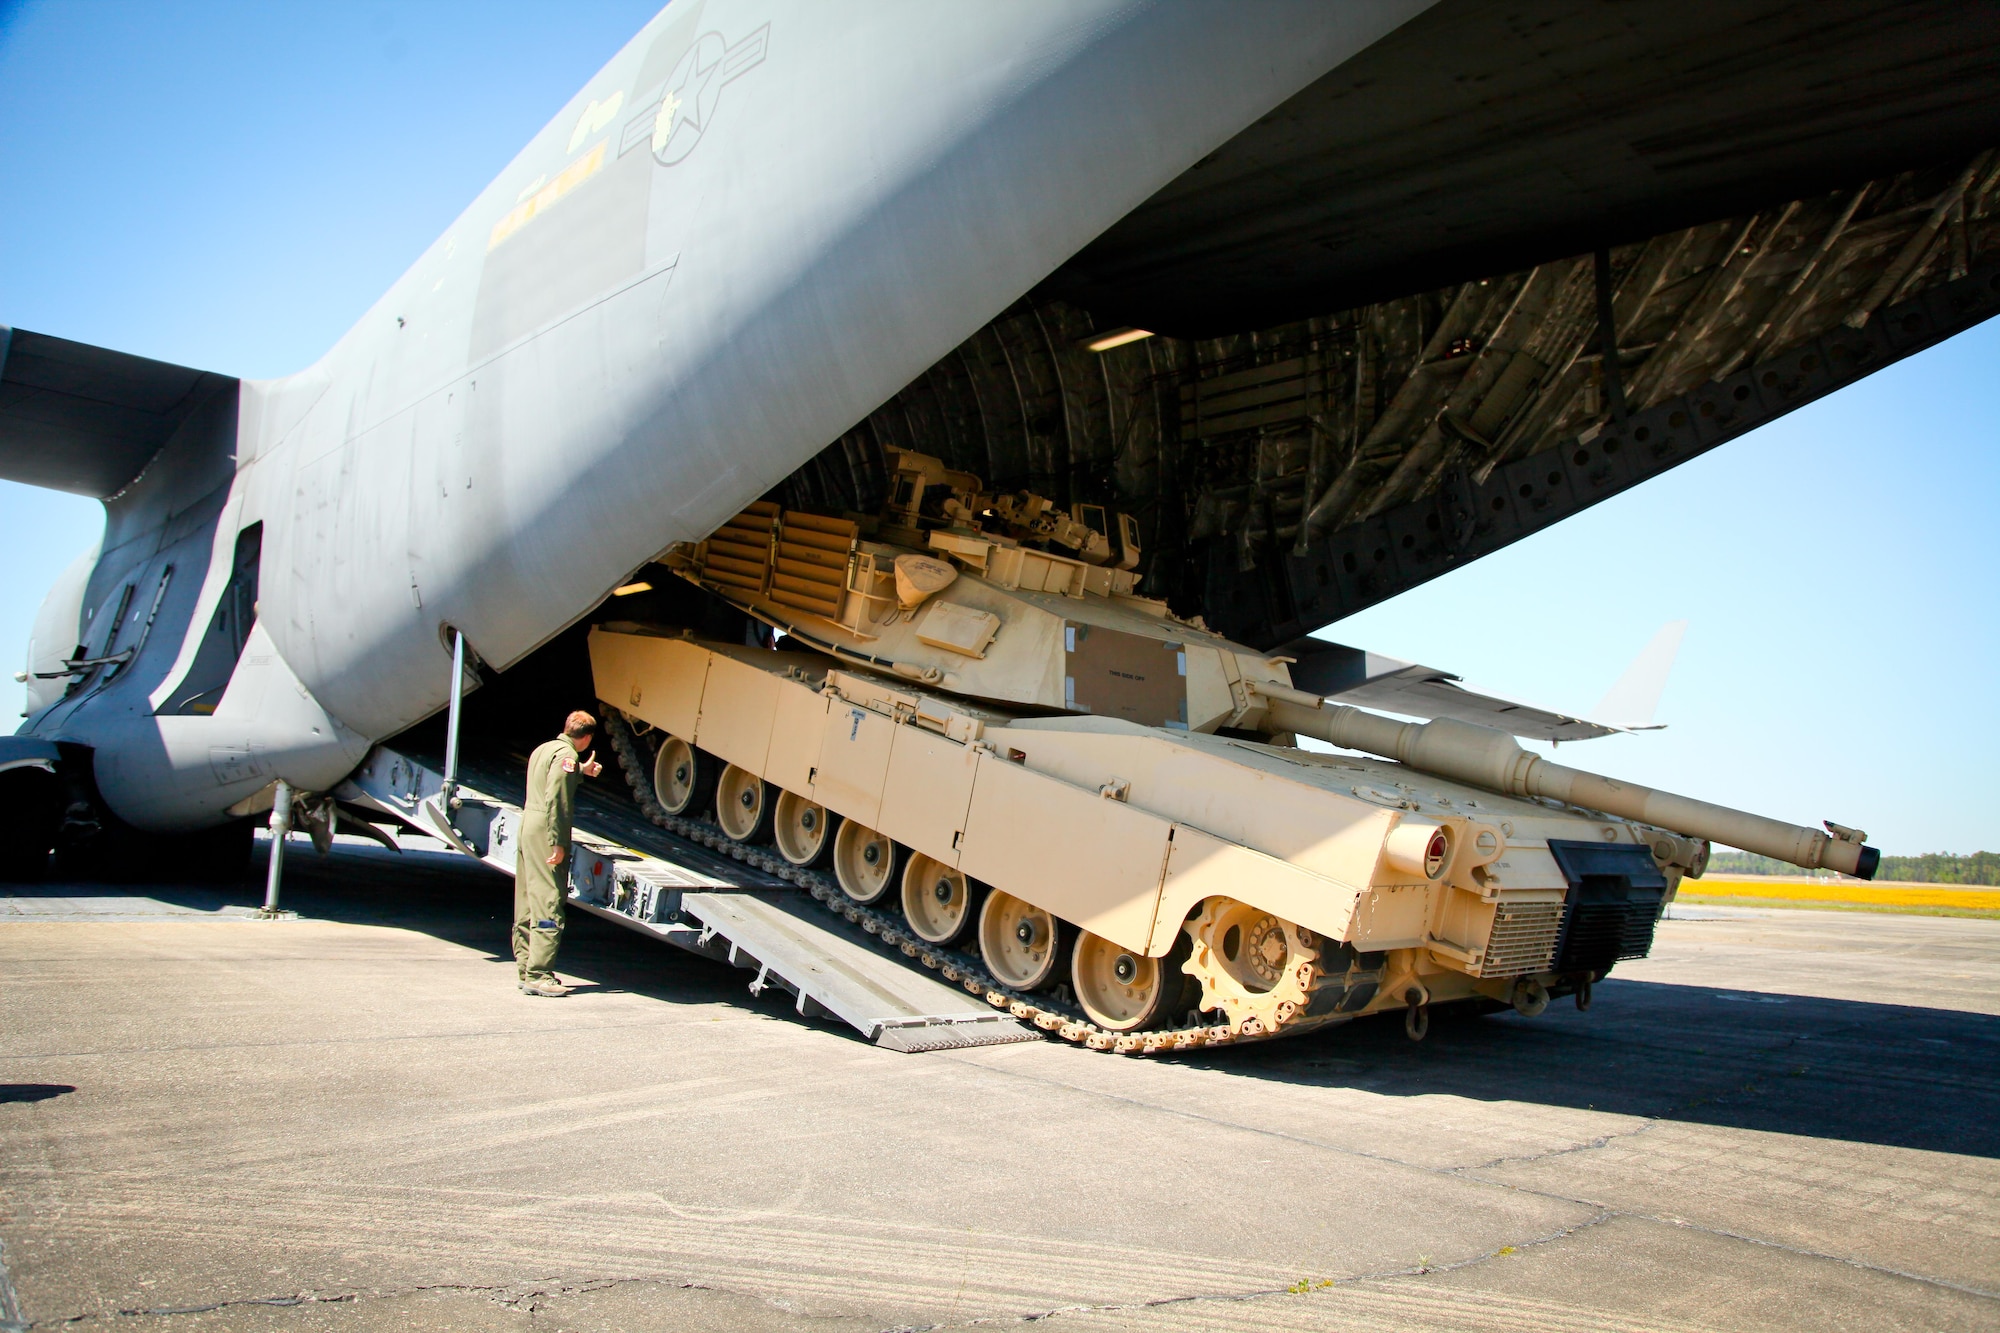 Tech Sgt. Vinnie White, a loadmaster with the 315th Airlift Control Flight, gives the thumbs up to crew members inside the C-17 Globemaster III to continue the onload of the M1A1SA Abrams main battle tank Thursday at Wright Army Airfield, Ga. C-17's from JB Charleston, S.C., and Wright-Patterson Air Force Base, Ohio, transported four tanks from Wright AAF to McEntire Air National Guard Base, S.C., in support of a tank movement for the 1/118th CAB. (U.S. Air Force photo by Staff Sgt. Rashard Coaxum/released)